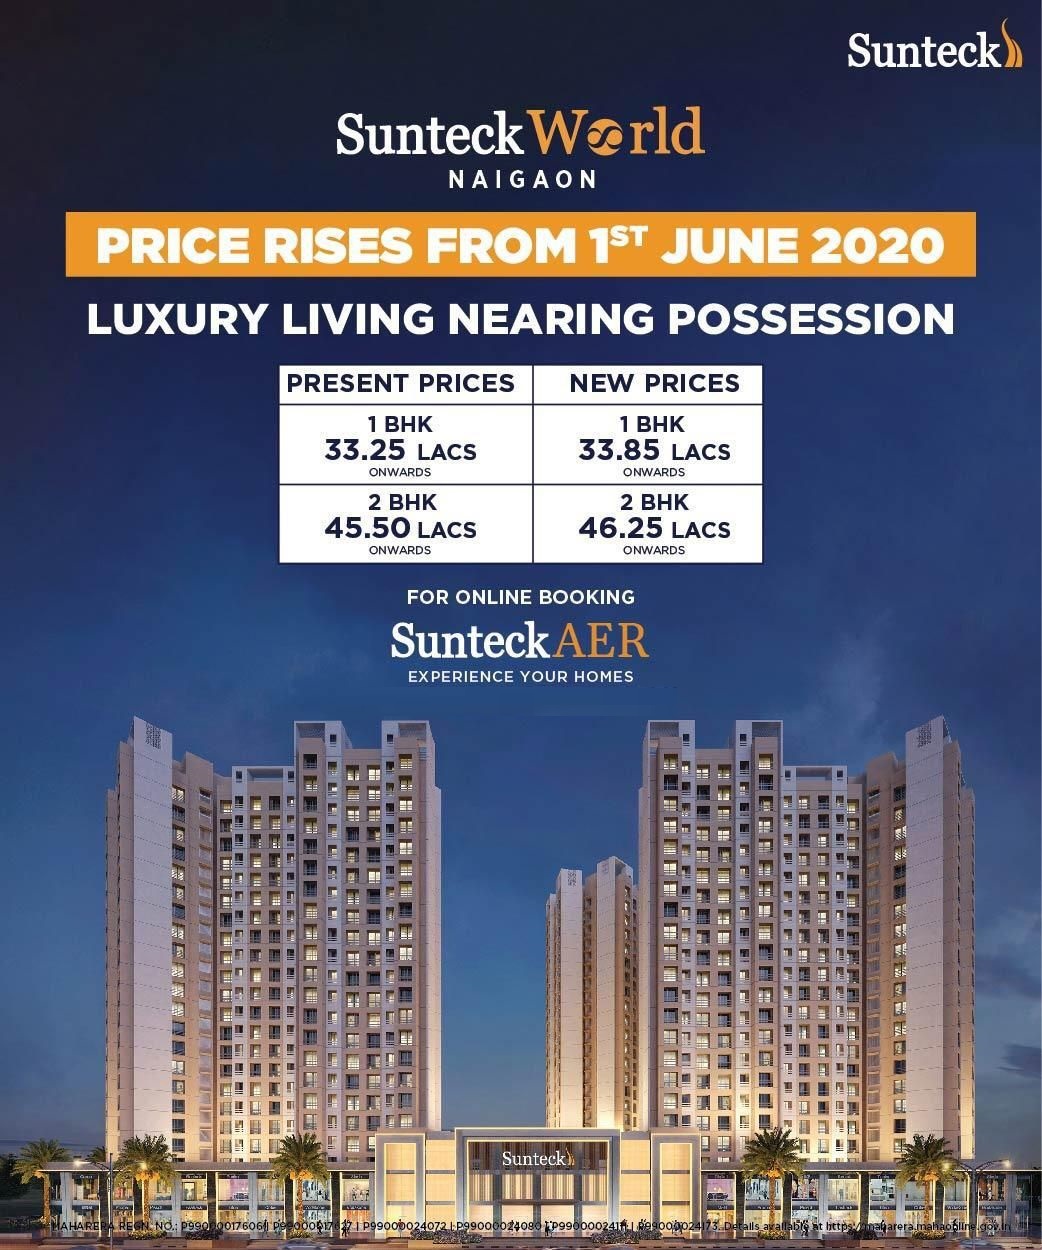 Extraordinary super smart savings ends on 31st May 2020, price rises from 1st June 2020 at Sunteck West World in Mumbai Update